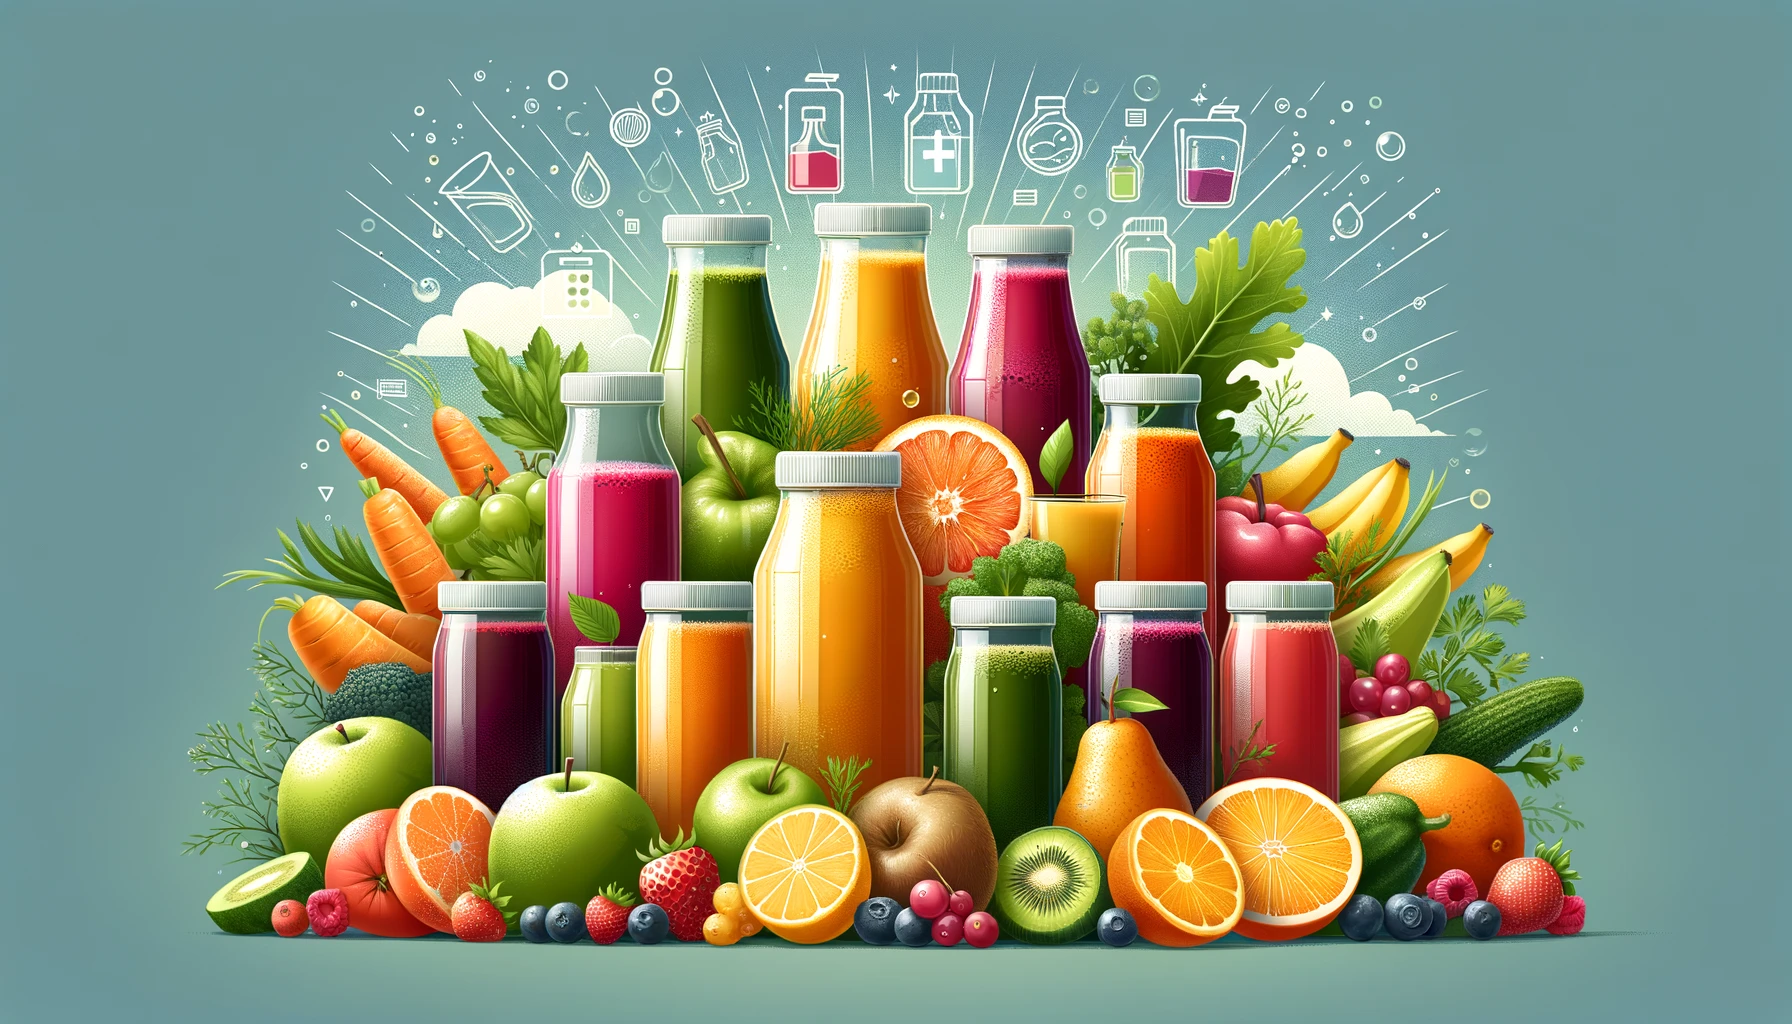 Colorful array of fruit and vegetable juices for a detoxifying juice fast, surrounded by fresh fruits and herbs.